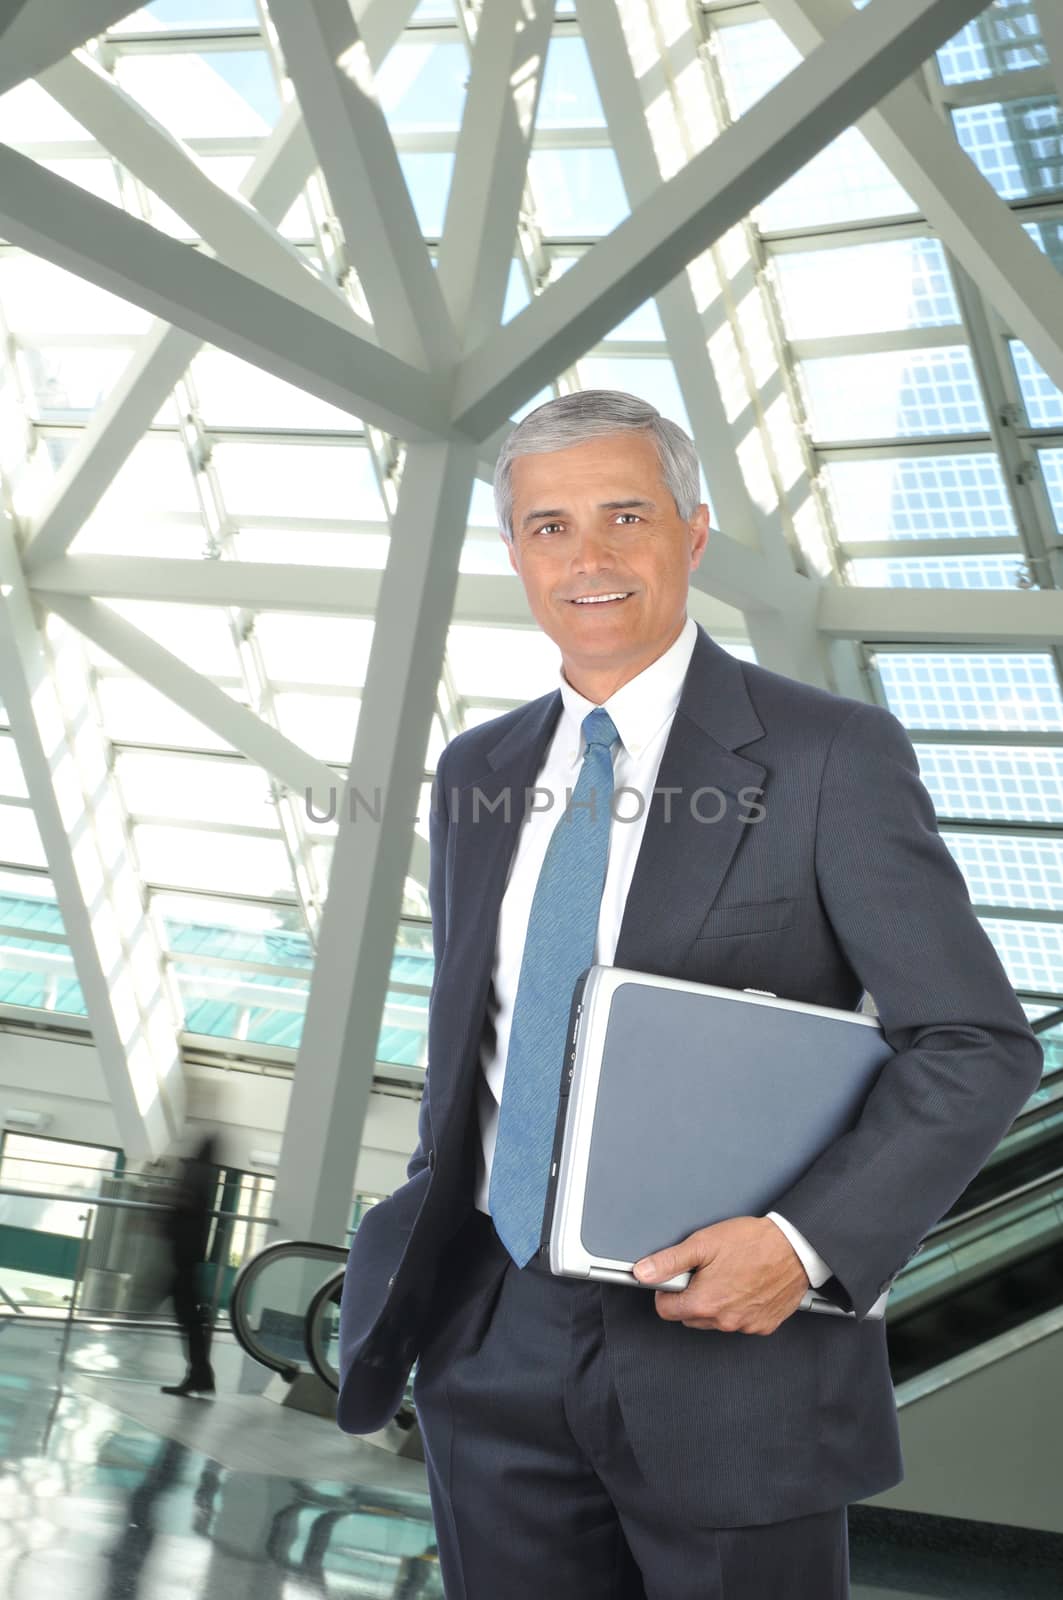 Smiling Middle aged Businessman Holding Laptop Computer Under His Arm in Building Lobby